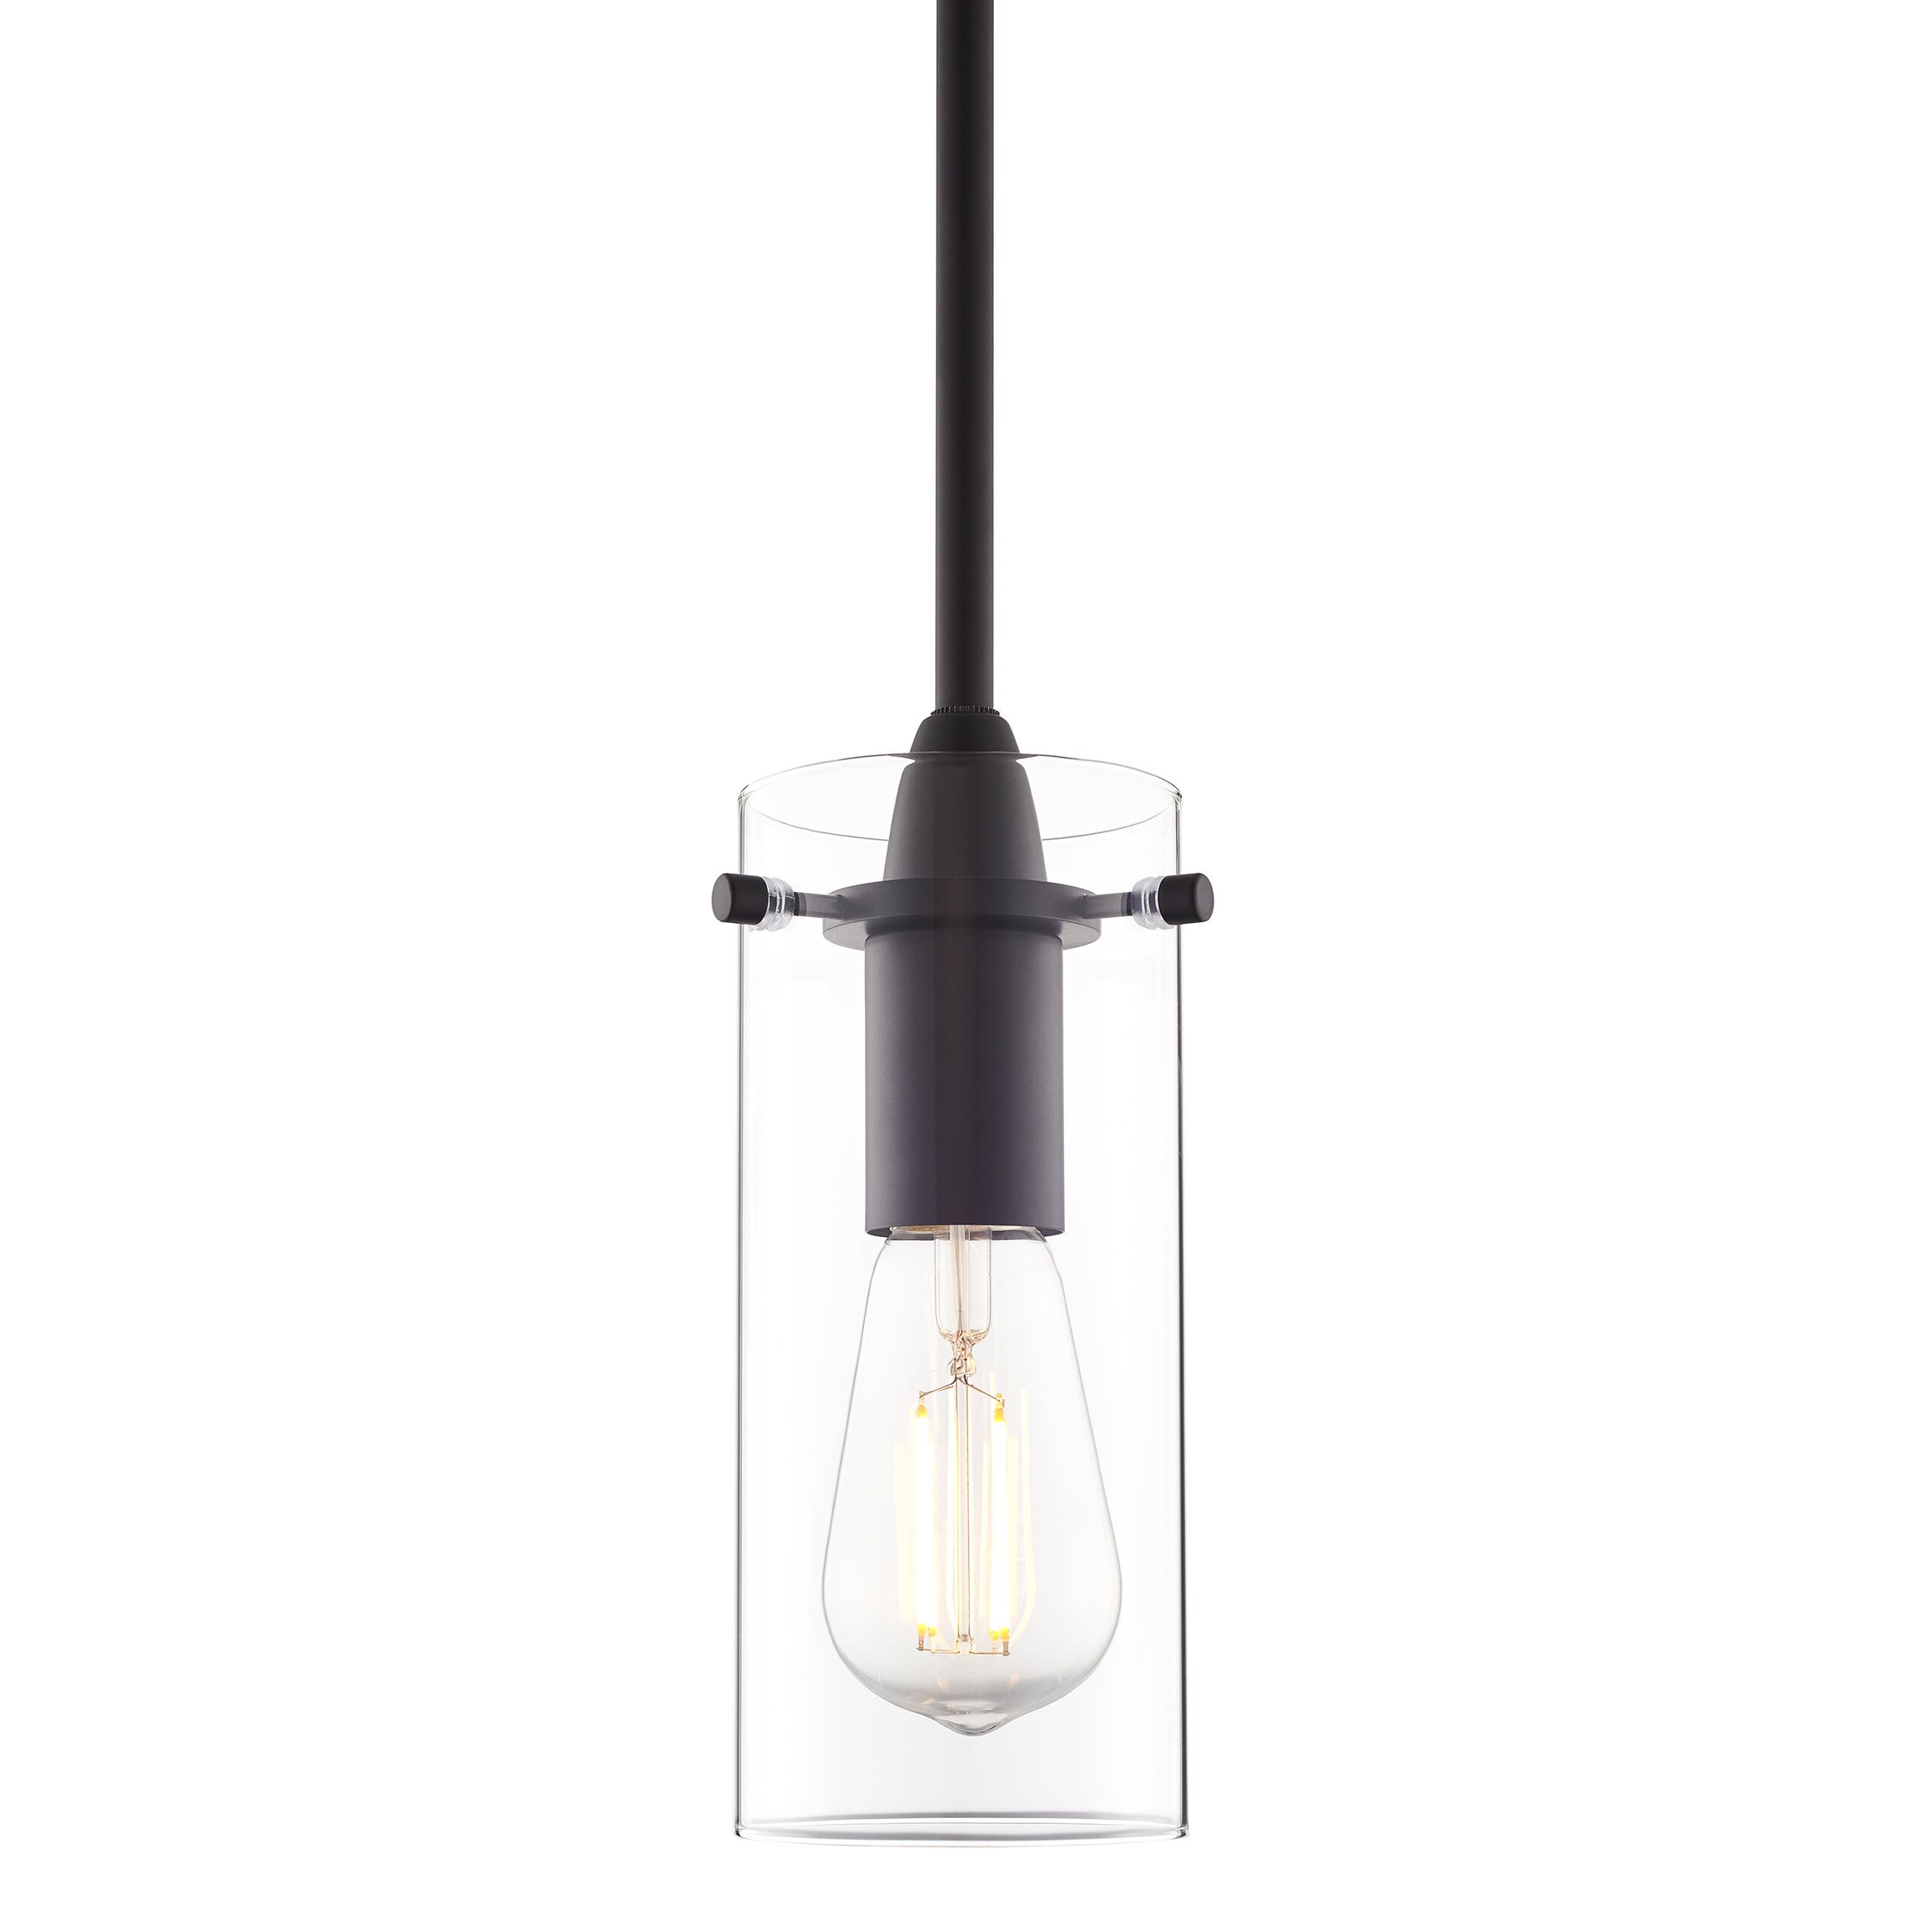 Fennia 1 Light Single Cylinder Pendants Intended For Latest Ivy Bronx Angelina 1 Light Single Cylinder Pendant (View 17 of 20)